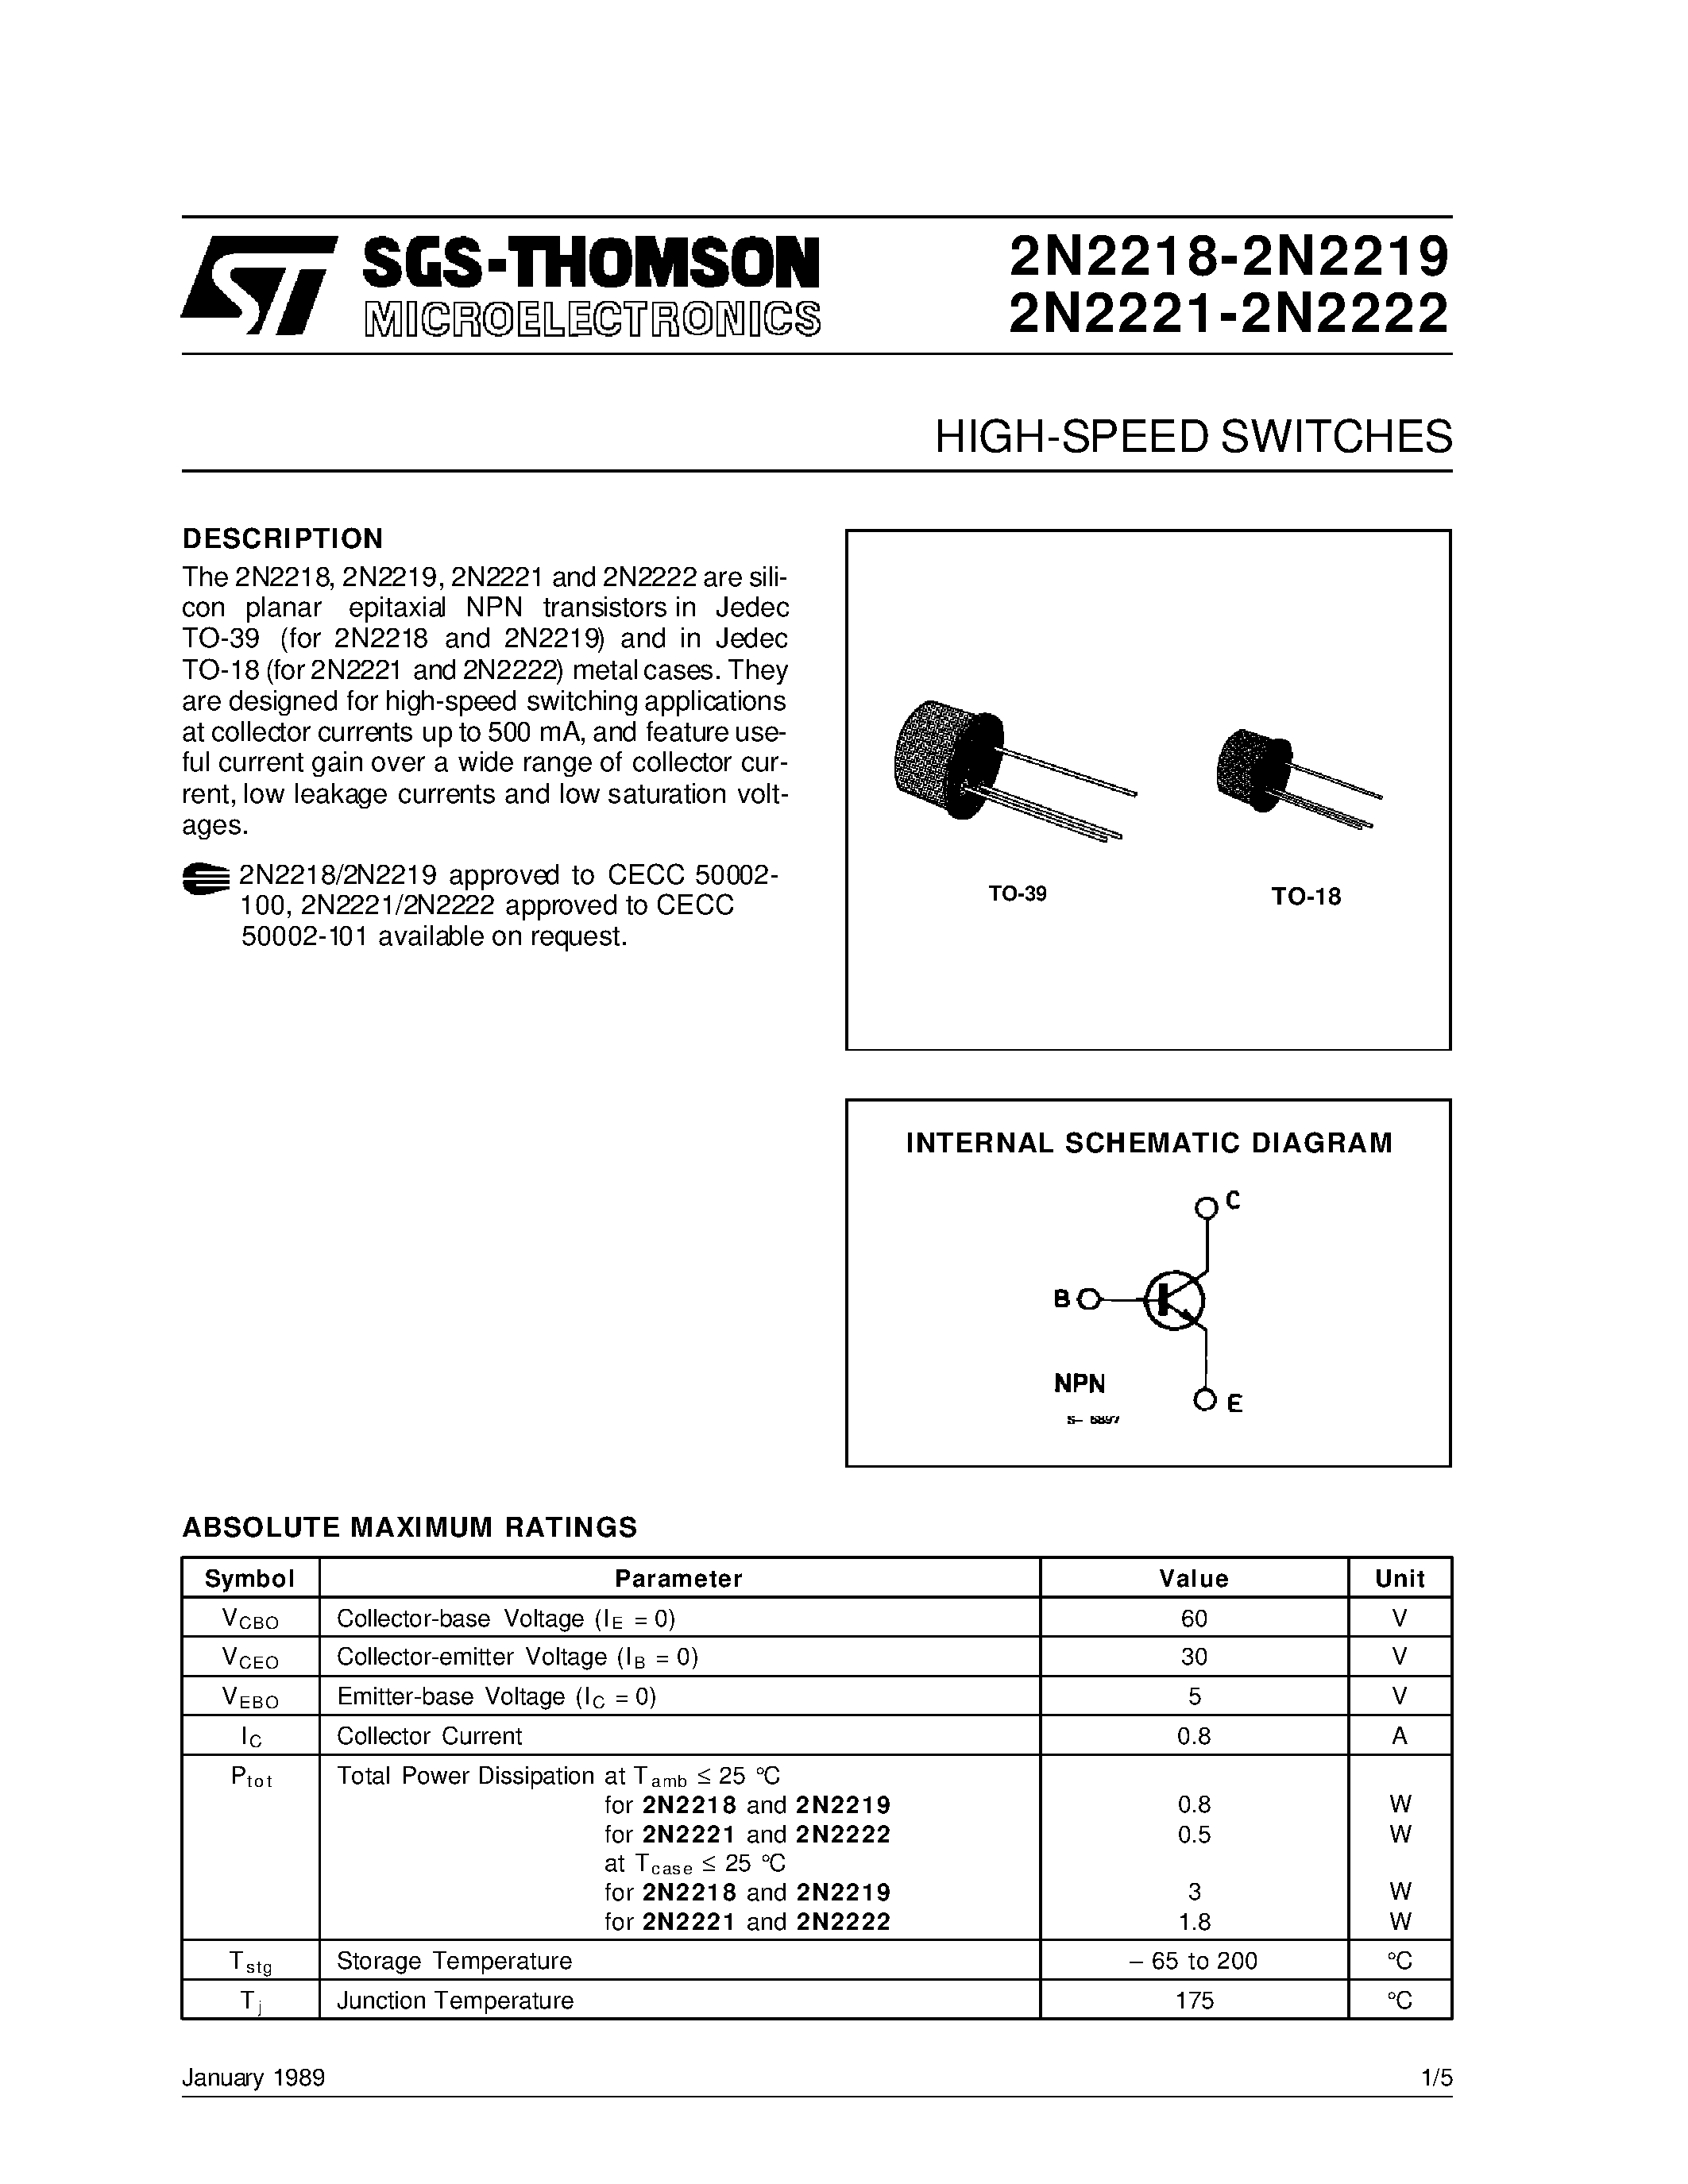 Datasheet 2N2221-2N2222 - HIGH-SPEED SWITCHES page 1